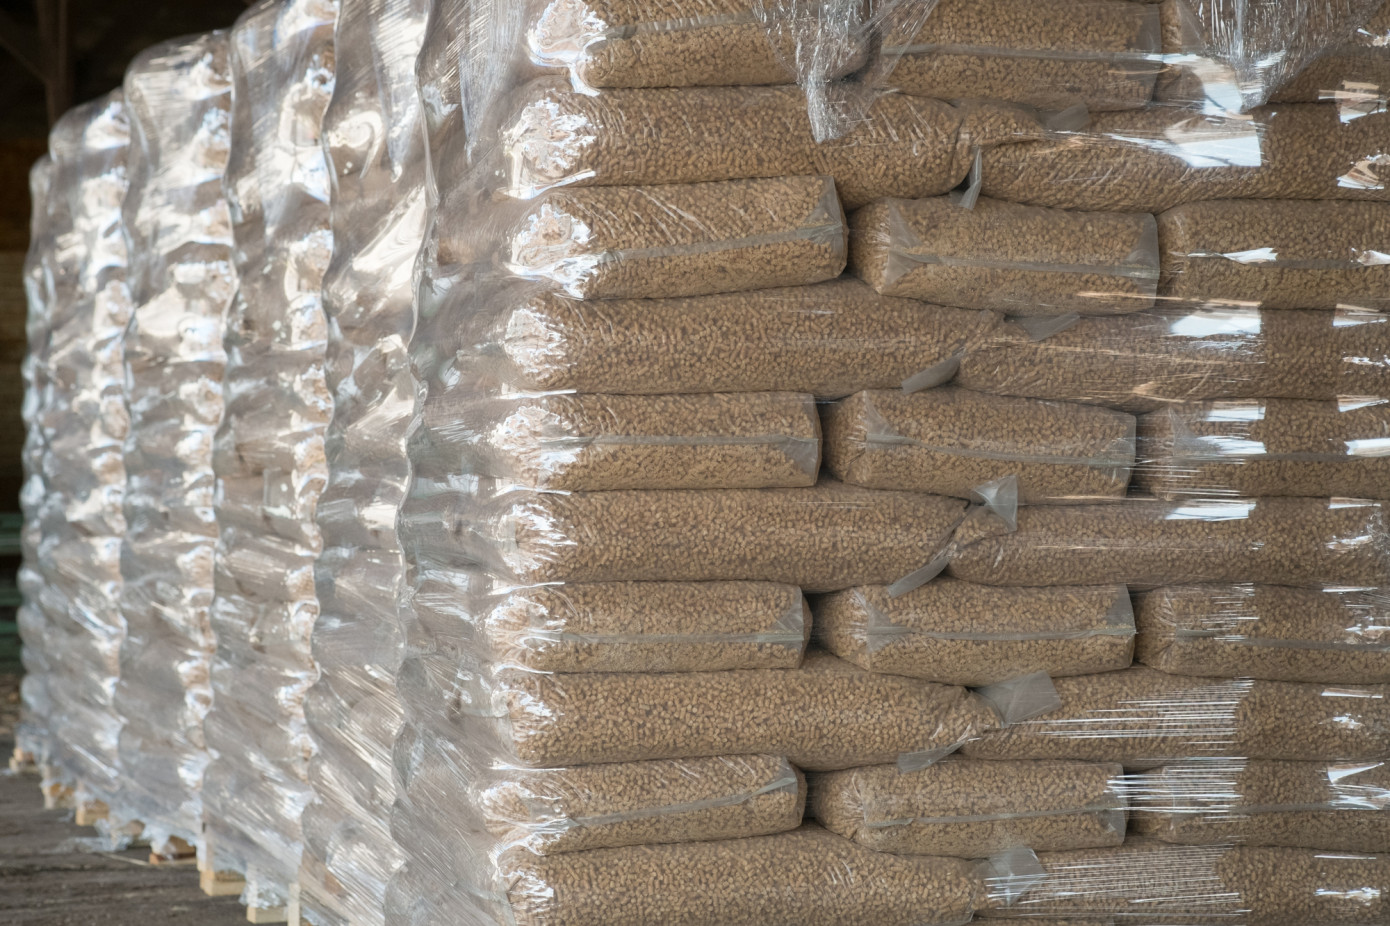 Exports of wood pellets from Vietnam to Japan shoot 102% in February